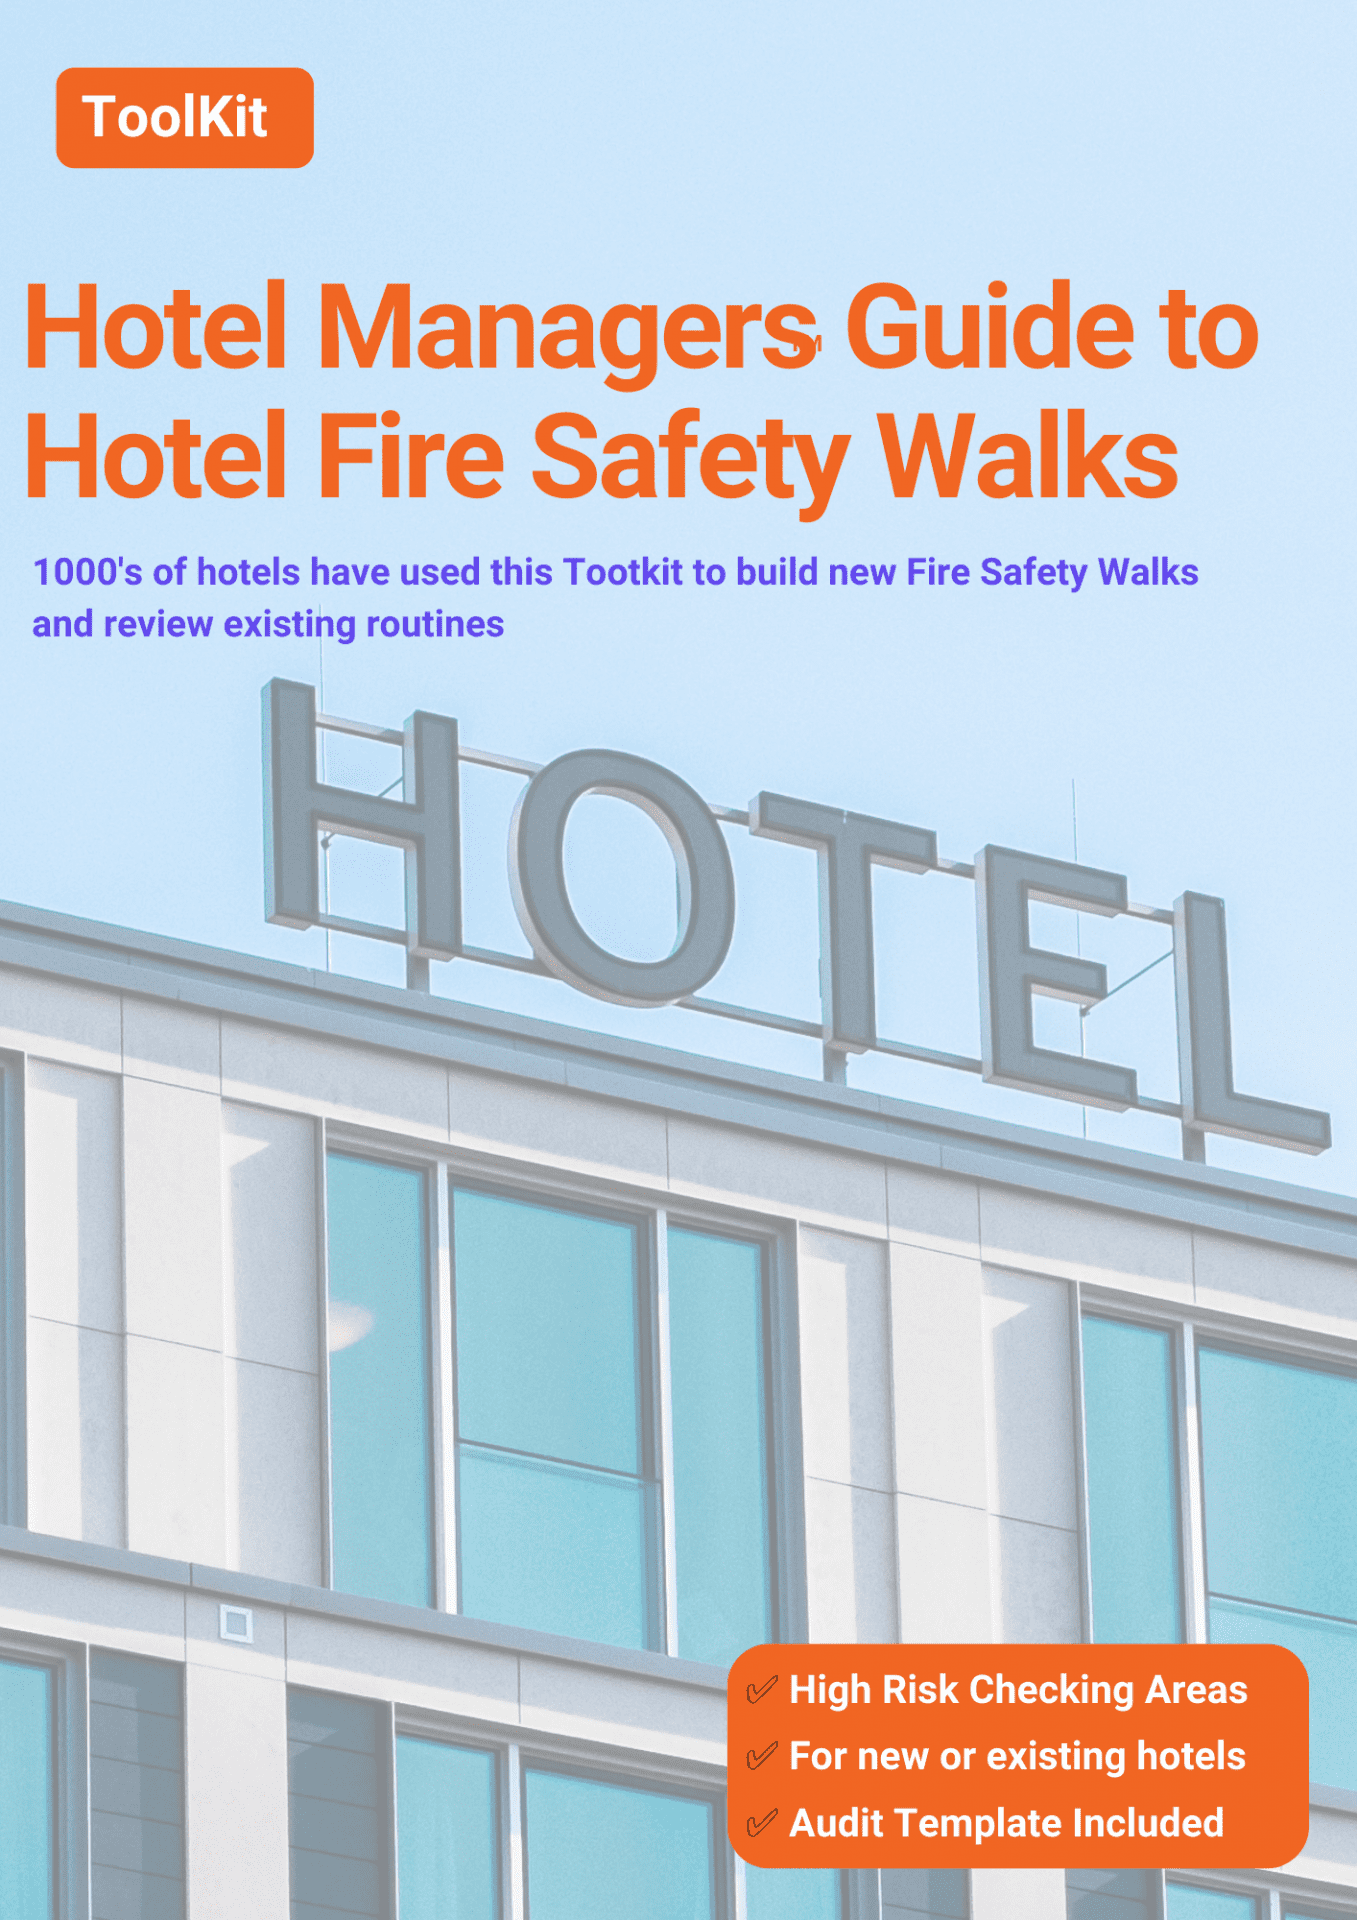 Hotel Managers Guide to Hotel Fire Safety Walks.